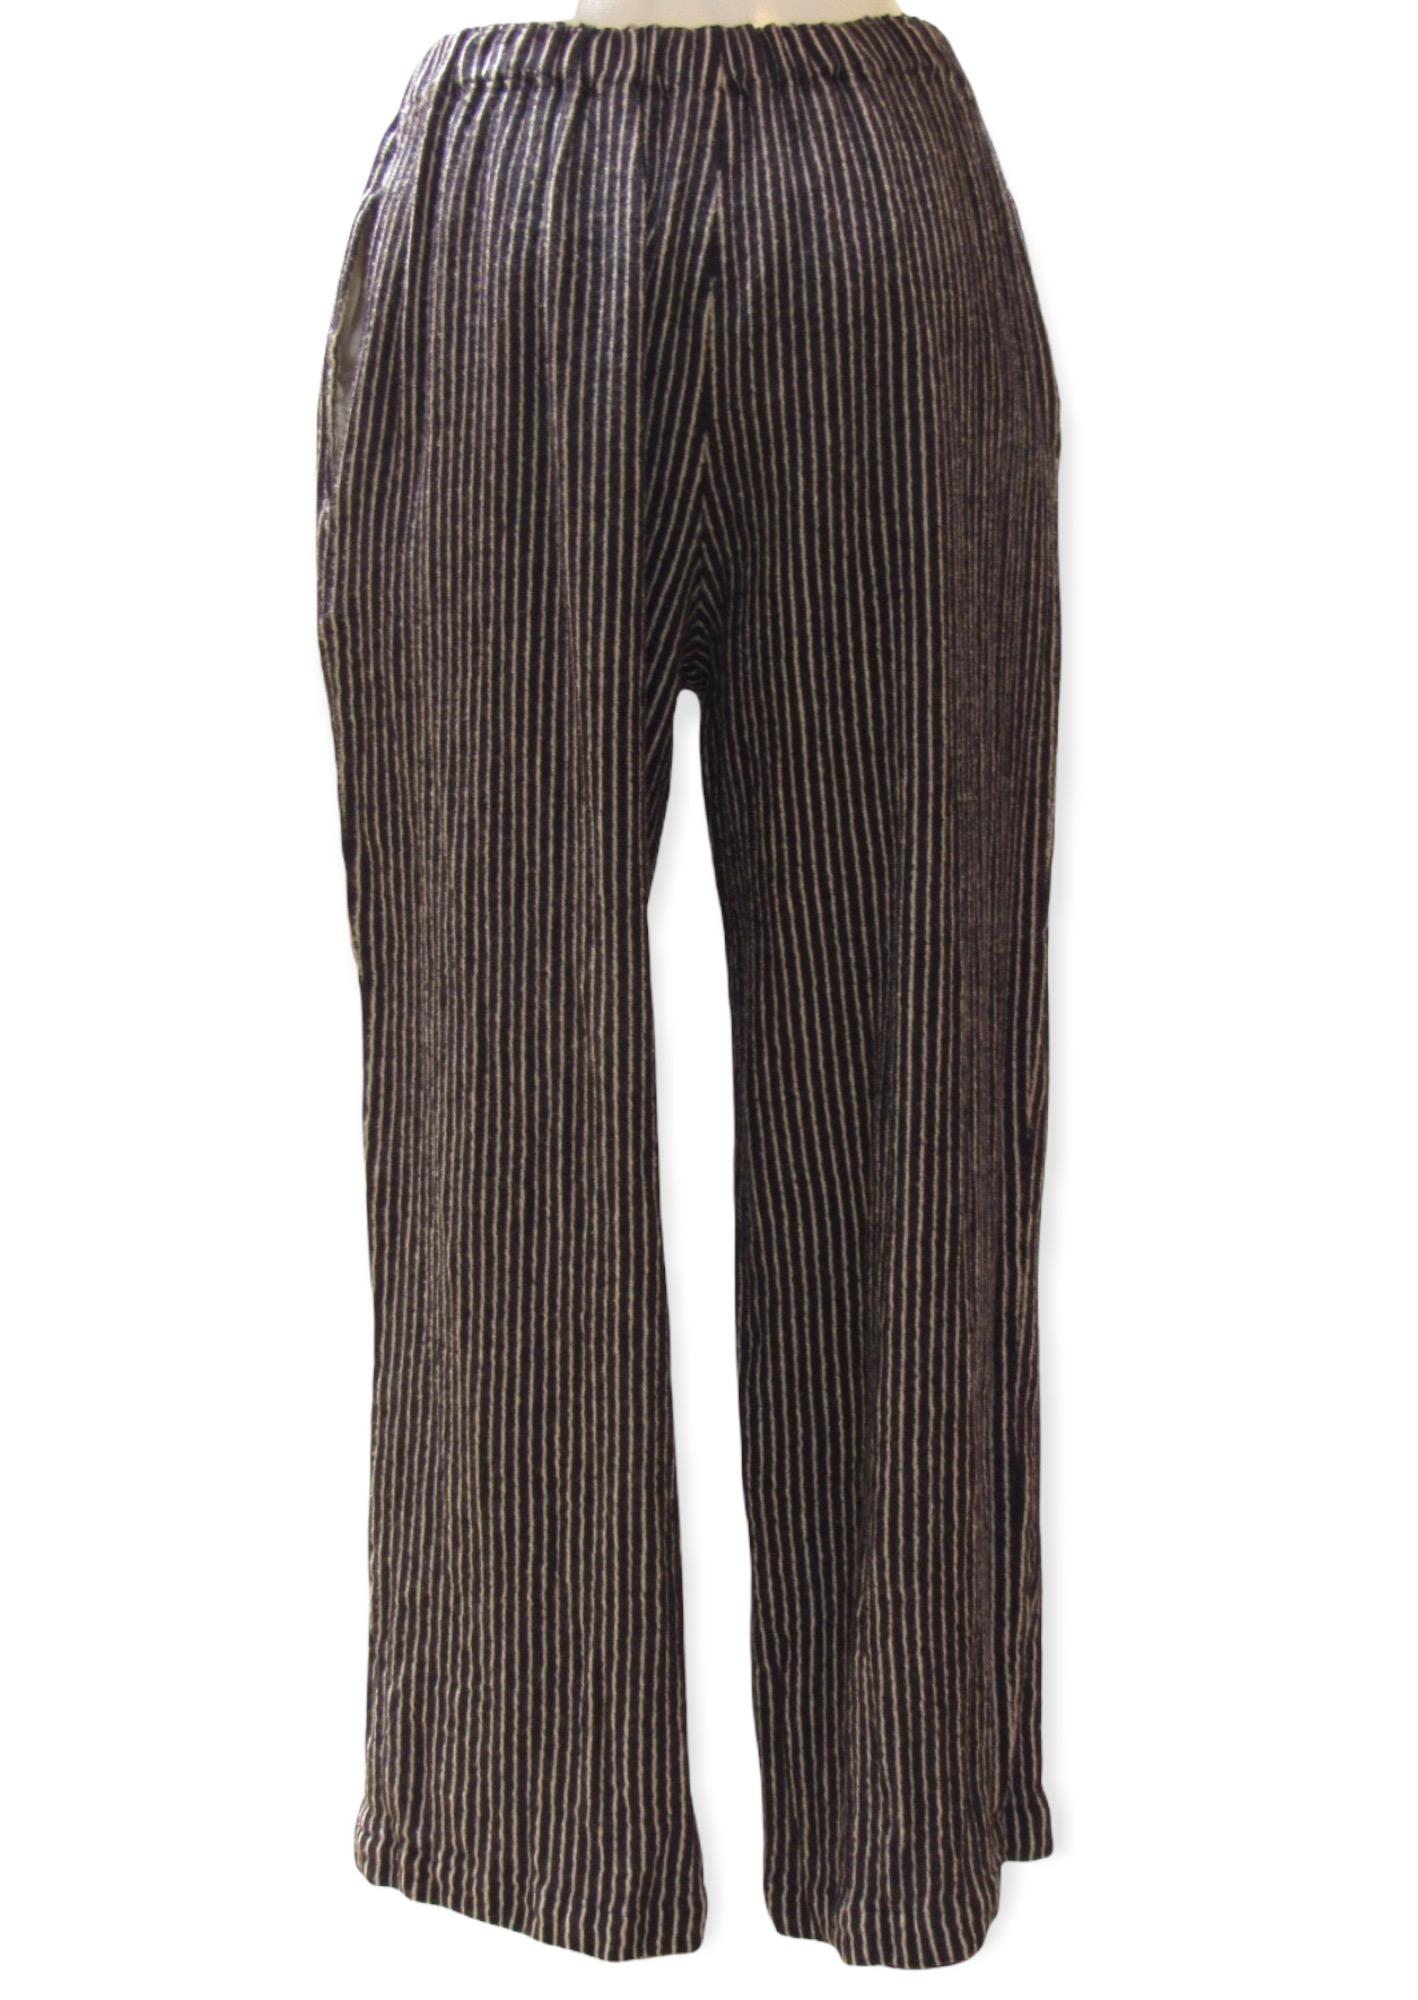 Comme des Garçons Navy Pinstriped Wide Leg Pants In New Condition For Sale In Laguna Beach, CA